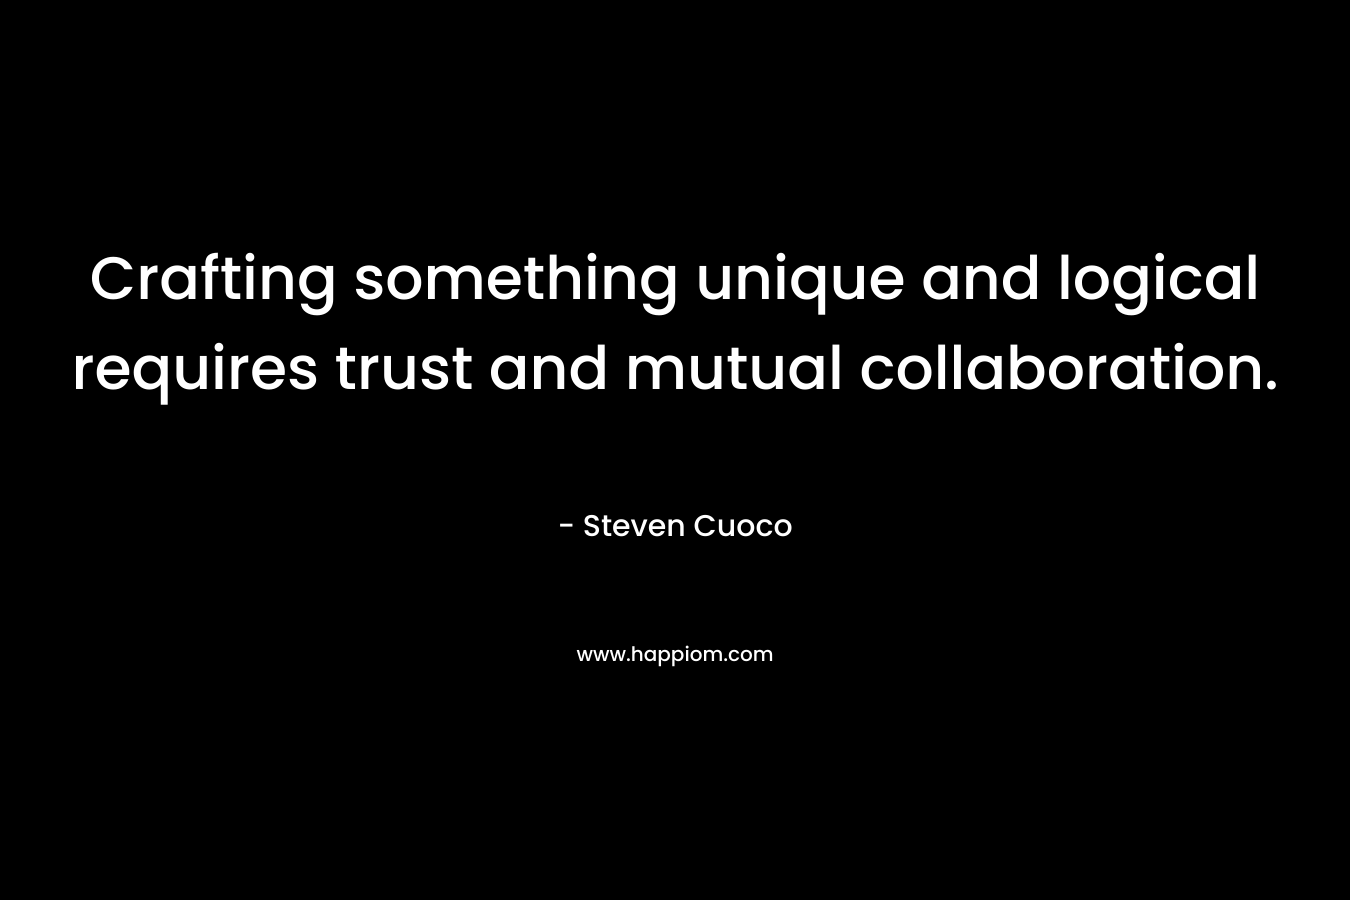 Crafting something unique and logical requires trust and mutual collaboration. – Steven Cuoco